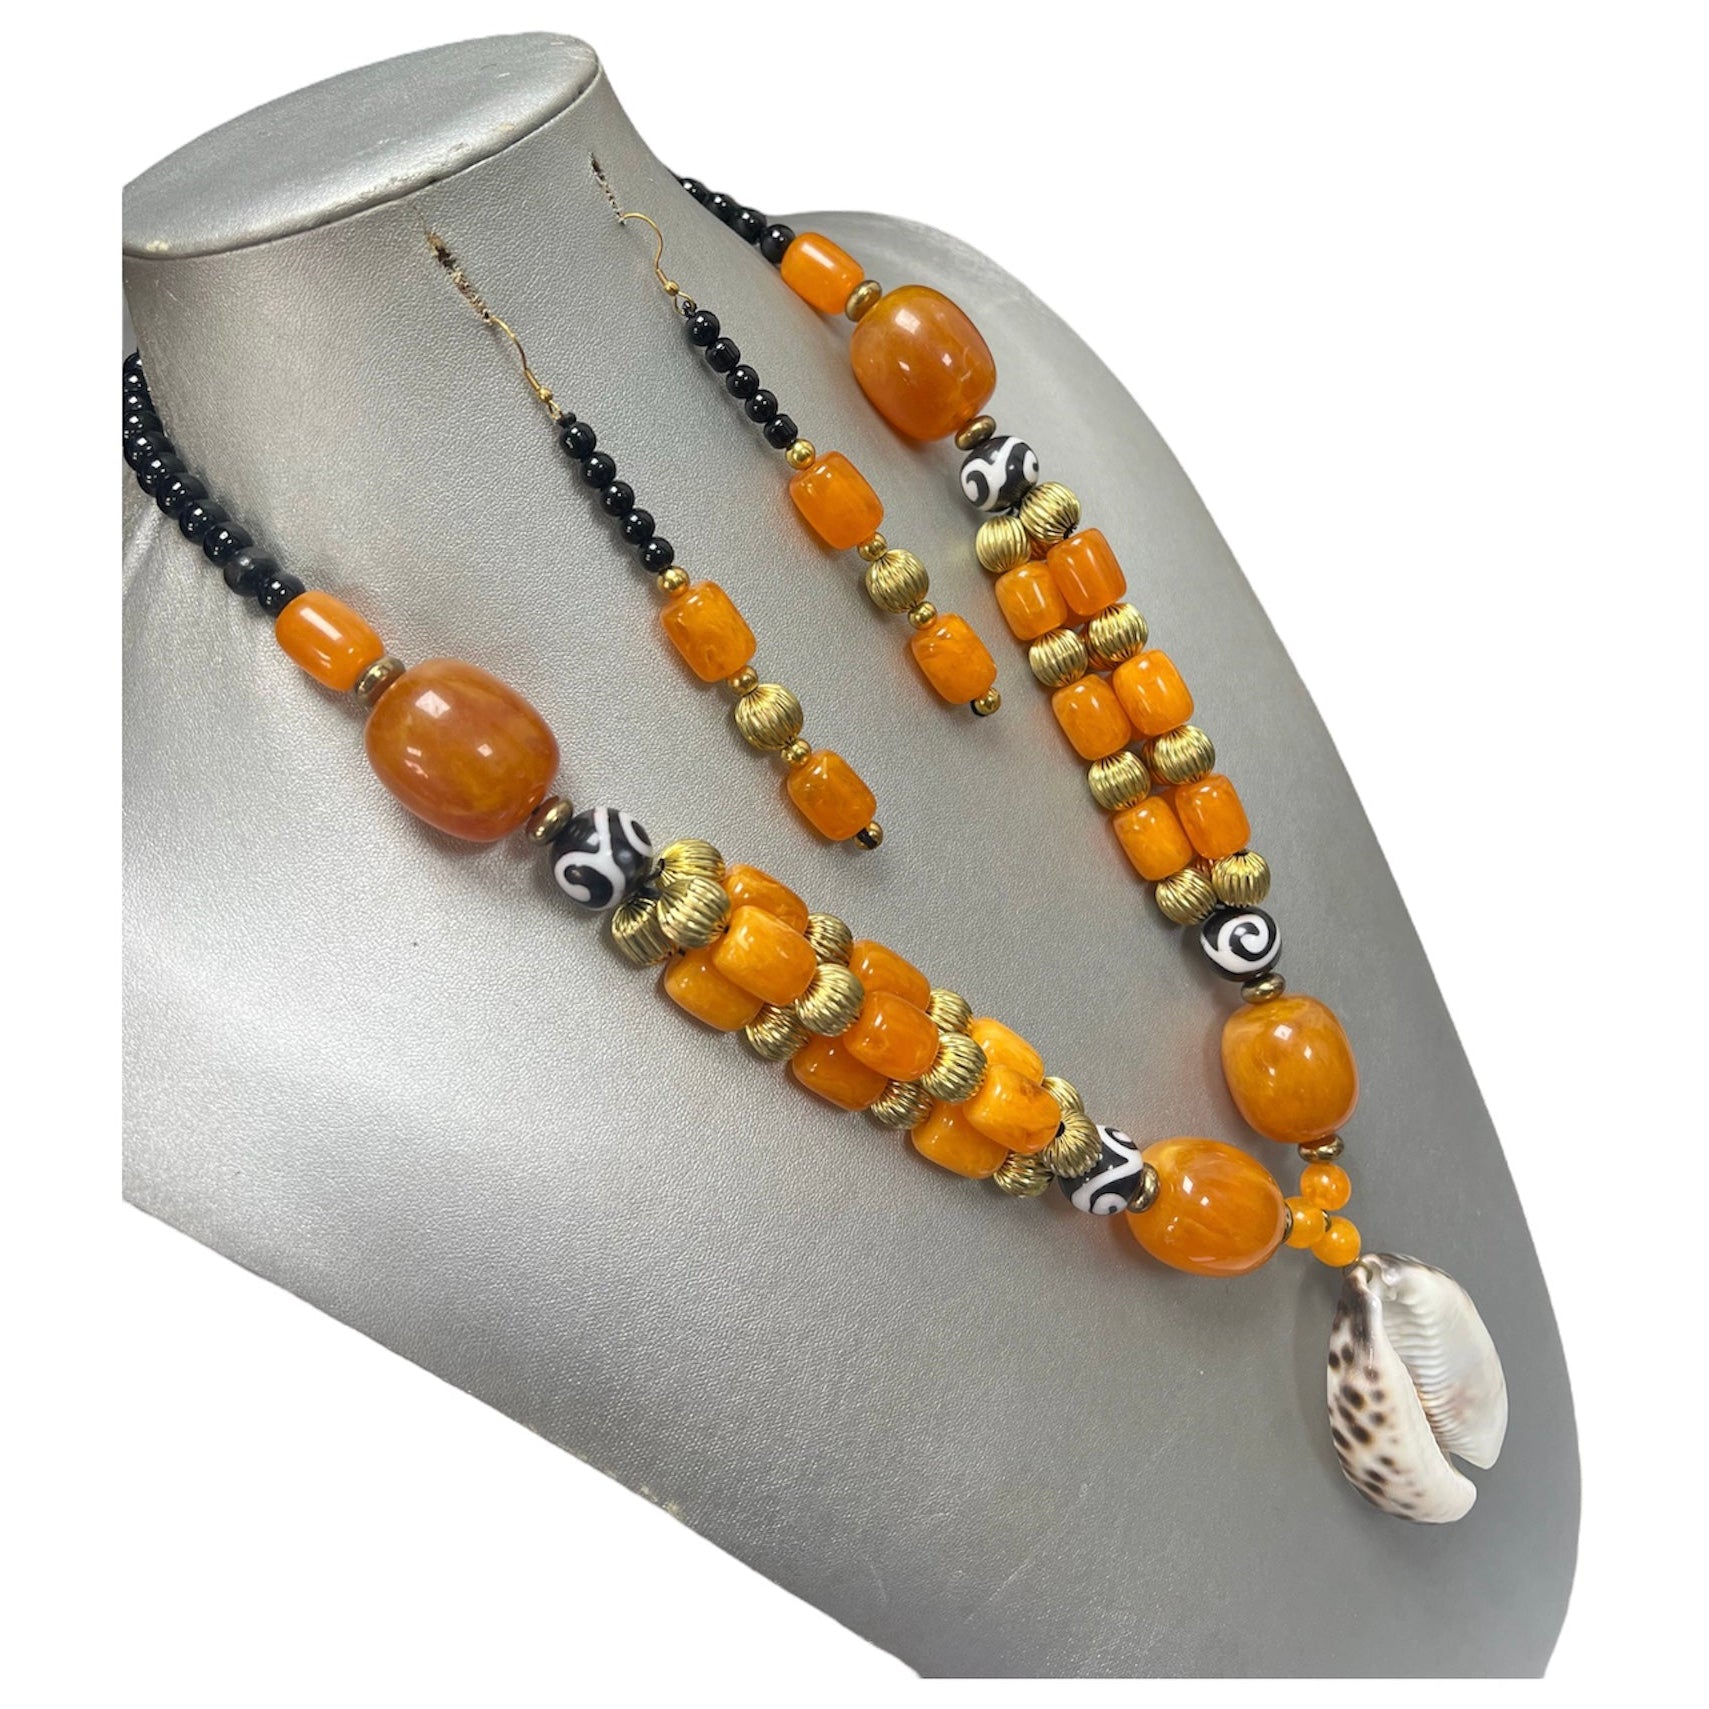 Women's African Necklace Set With Large Cowrie Shell Pendant -- Jewelry 52